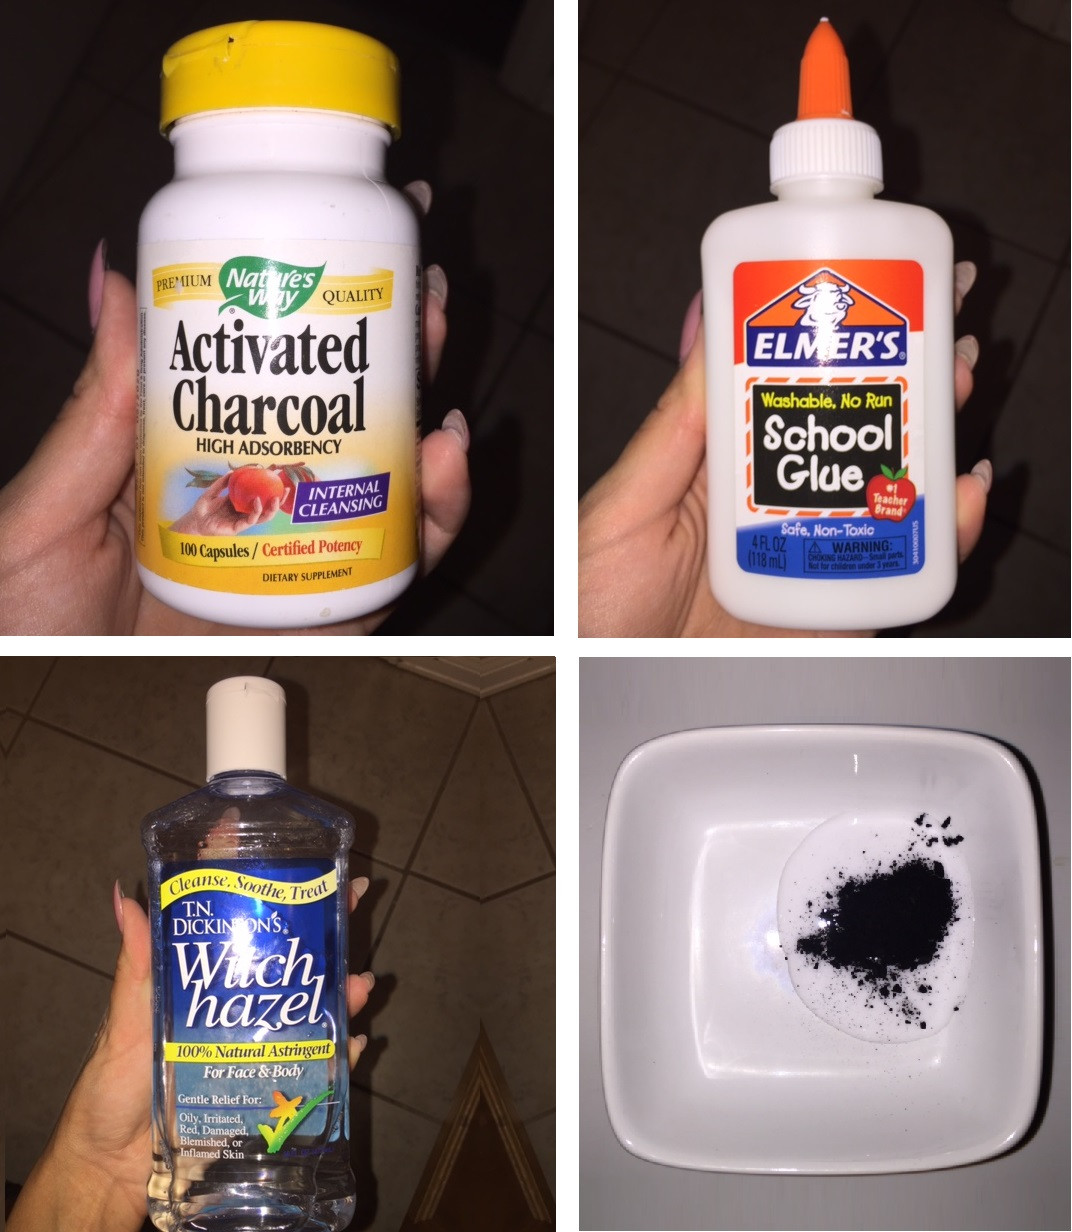 DIY Charcoal Mask Glue
 Activated Charcoal Face Mask Recipe With Glue